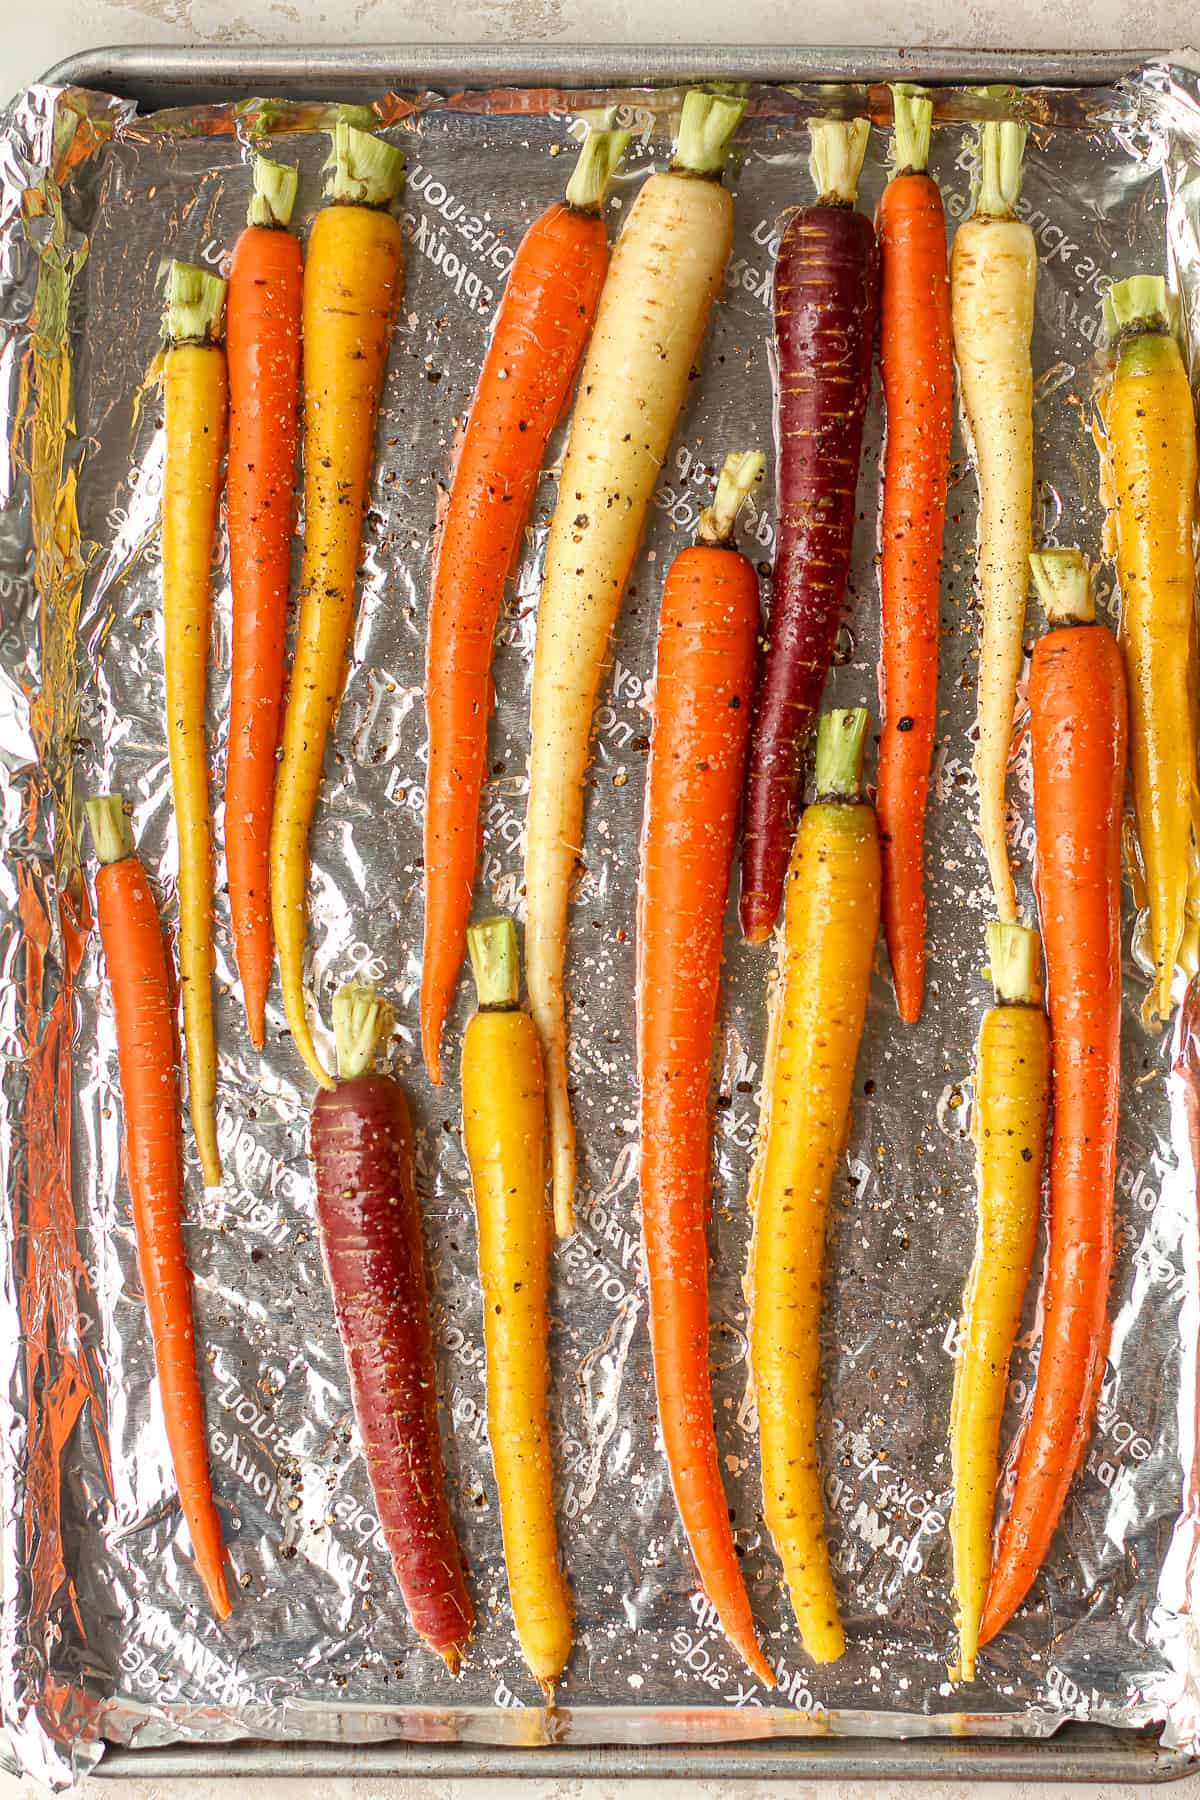 A foil lined pan with the raw and trimmed whole carrots.